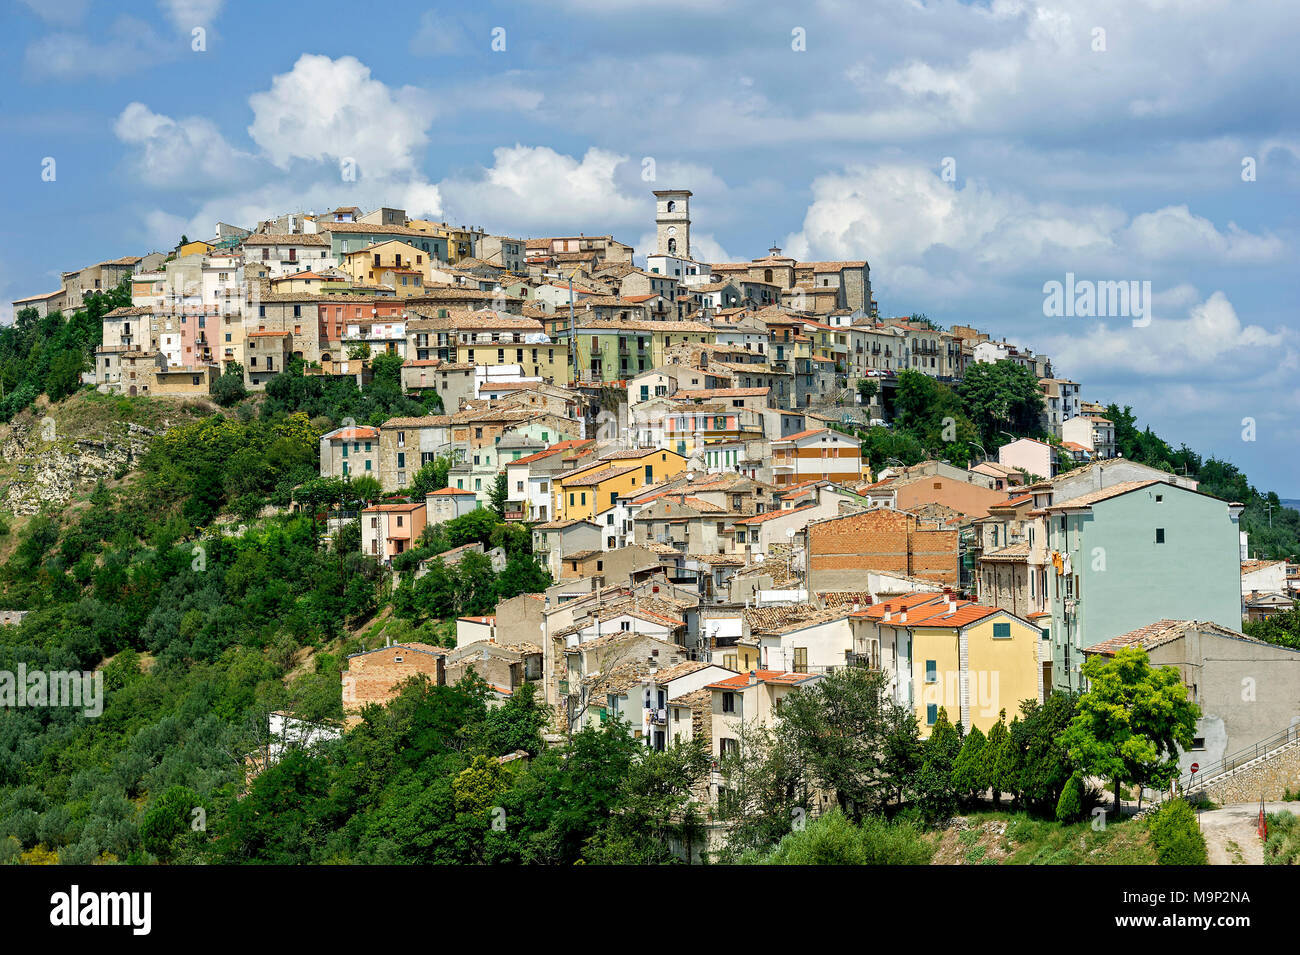 View of the old town on a green hill, Trivento, Molise, Italy Stock Photo